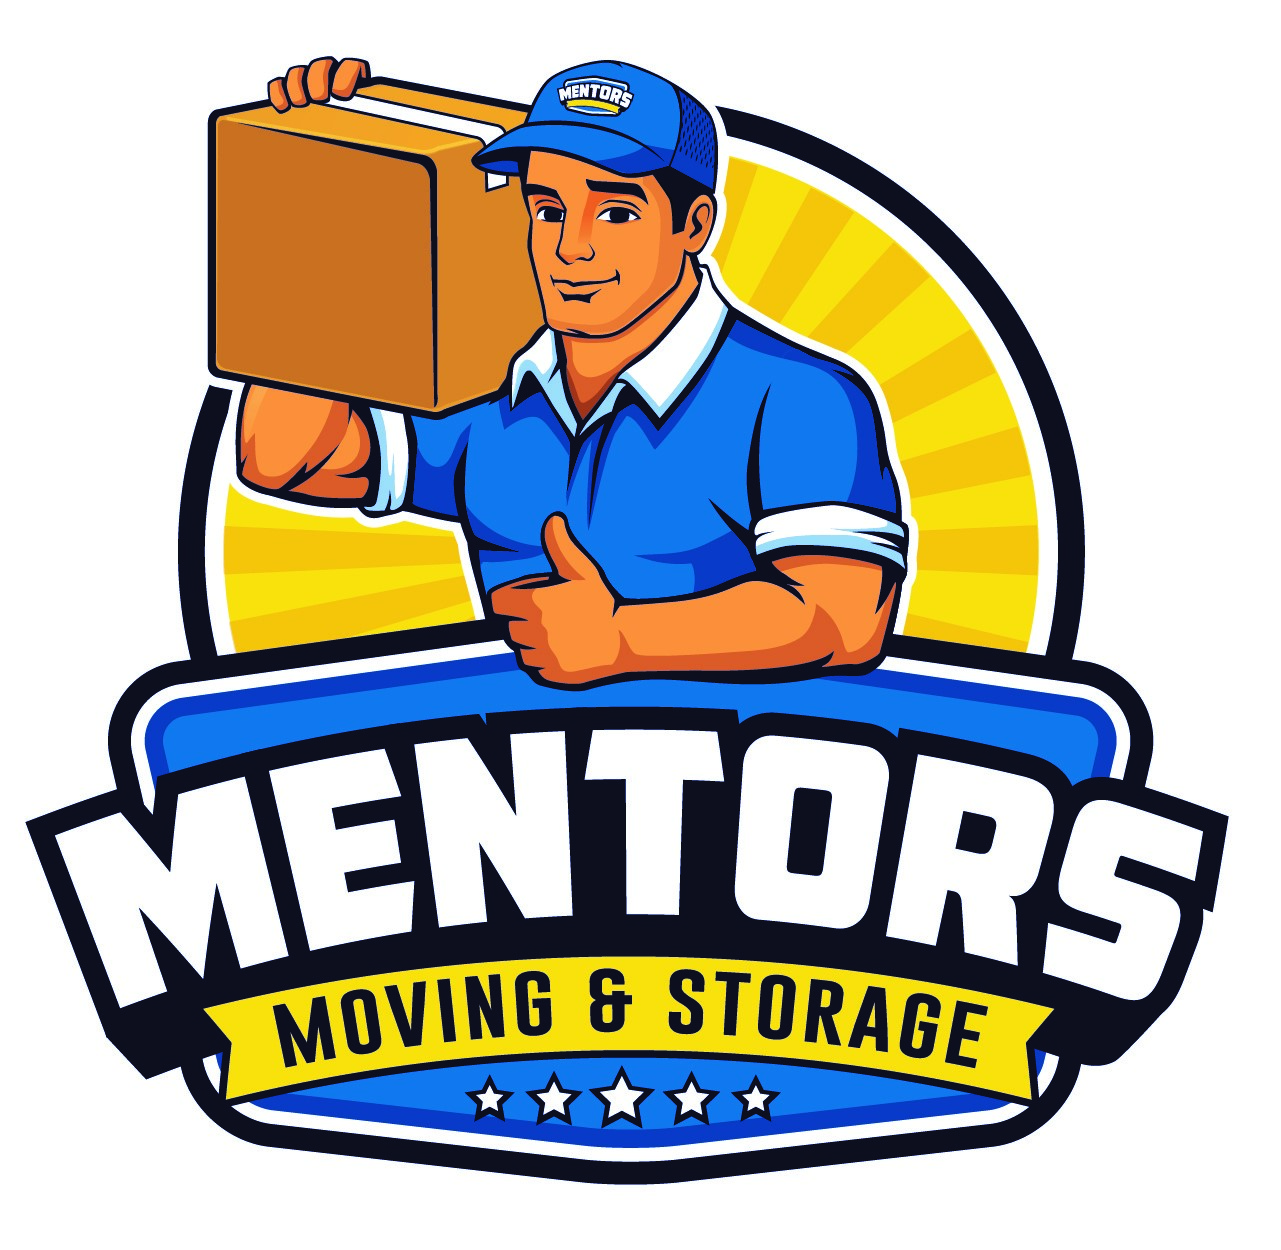 Mentors Moving - Mentors Moving and Storage